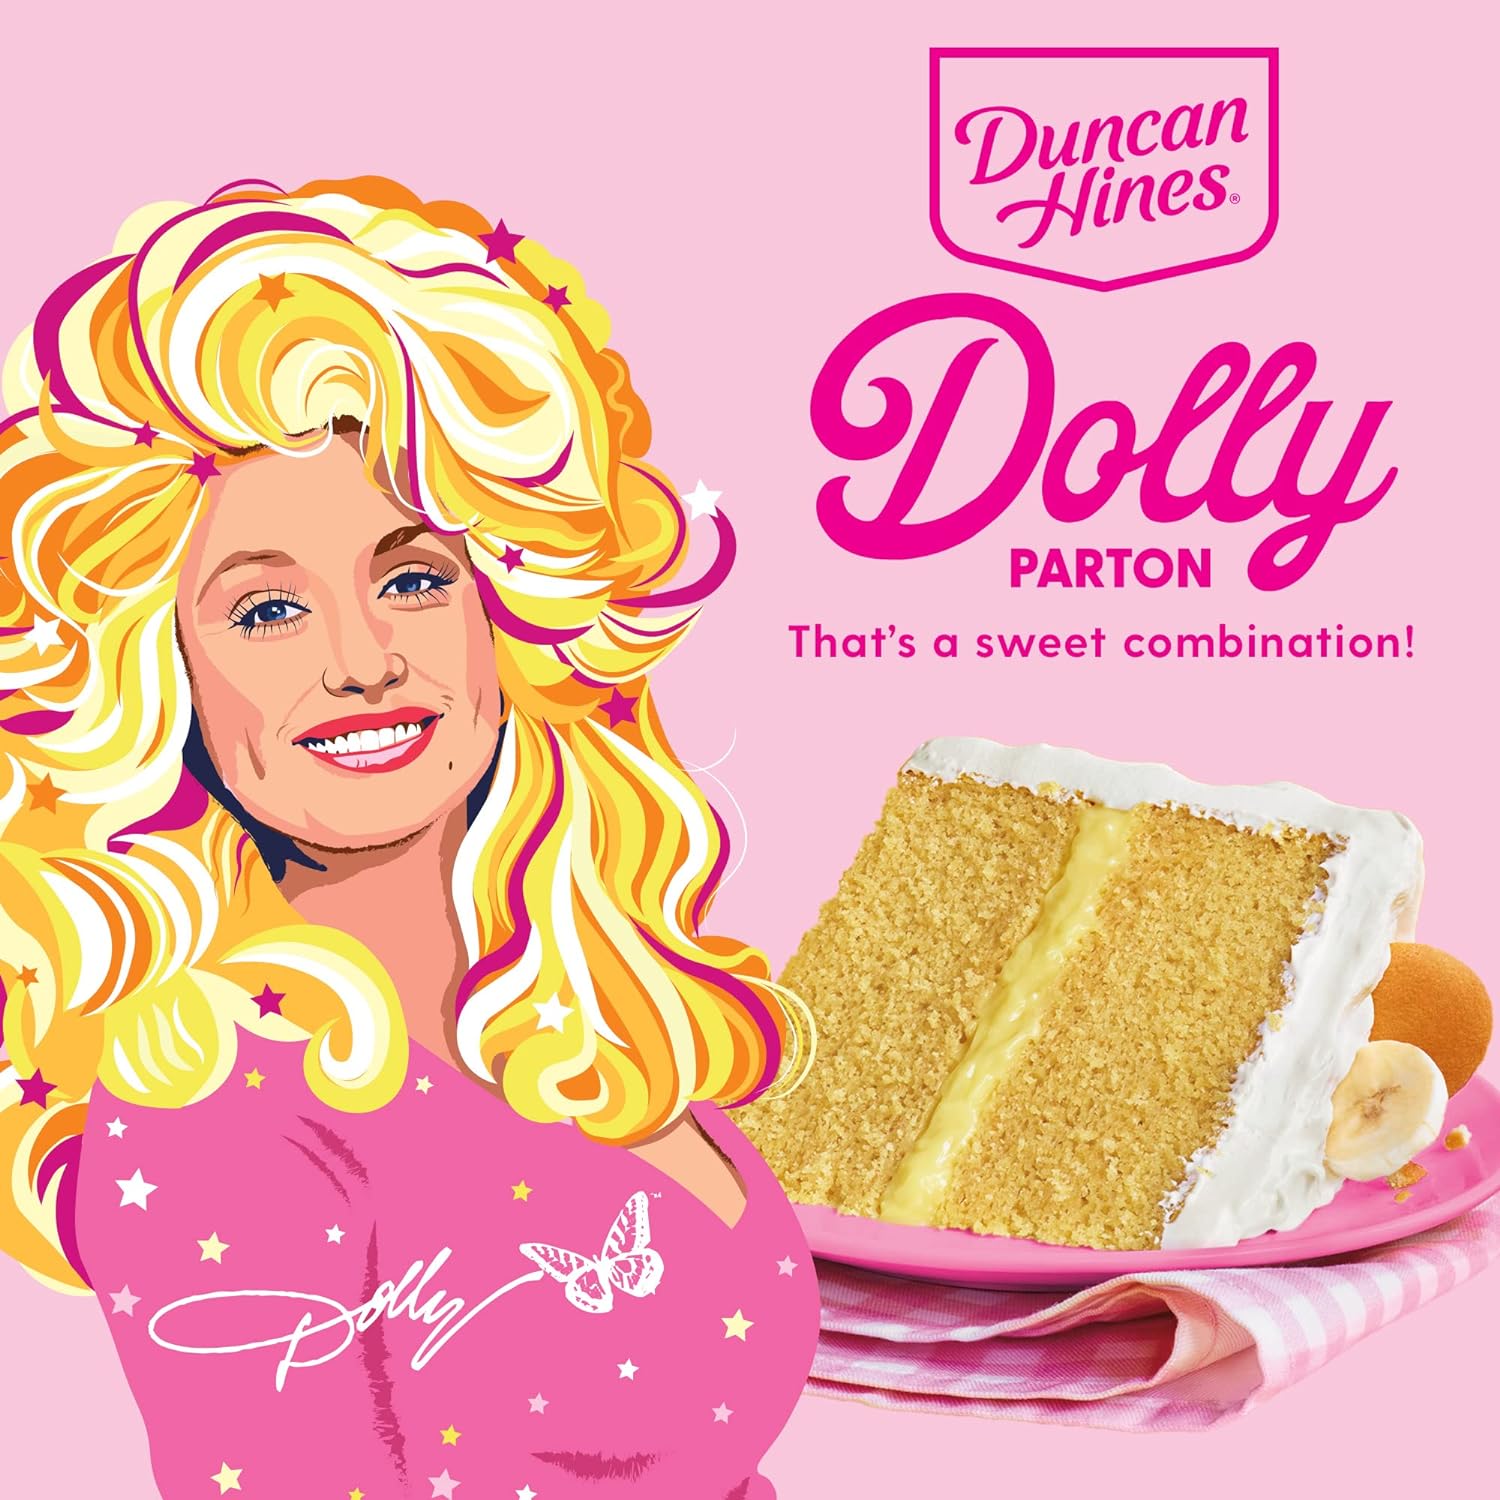 Duncan Hines Dolly Parton's Favorite Southern-Style Banana Flavored Cake Mix, 15.25 oz. : Grocery & Gourmet Food